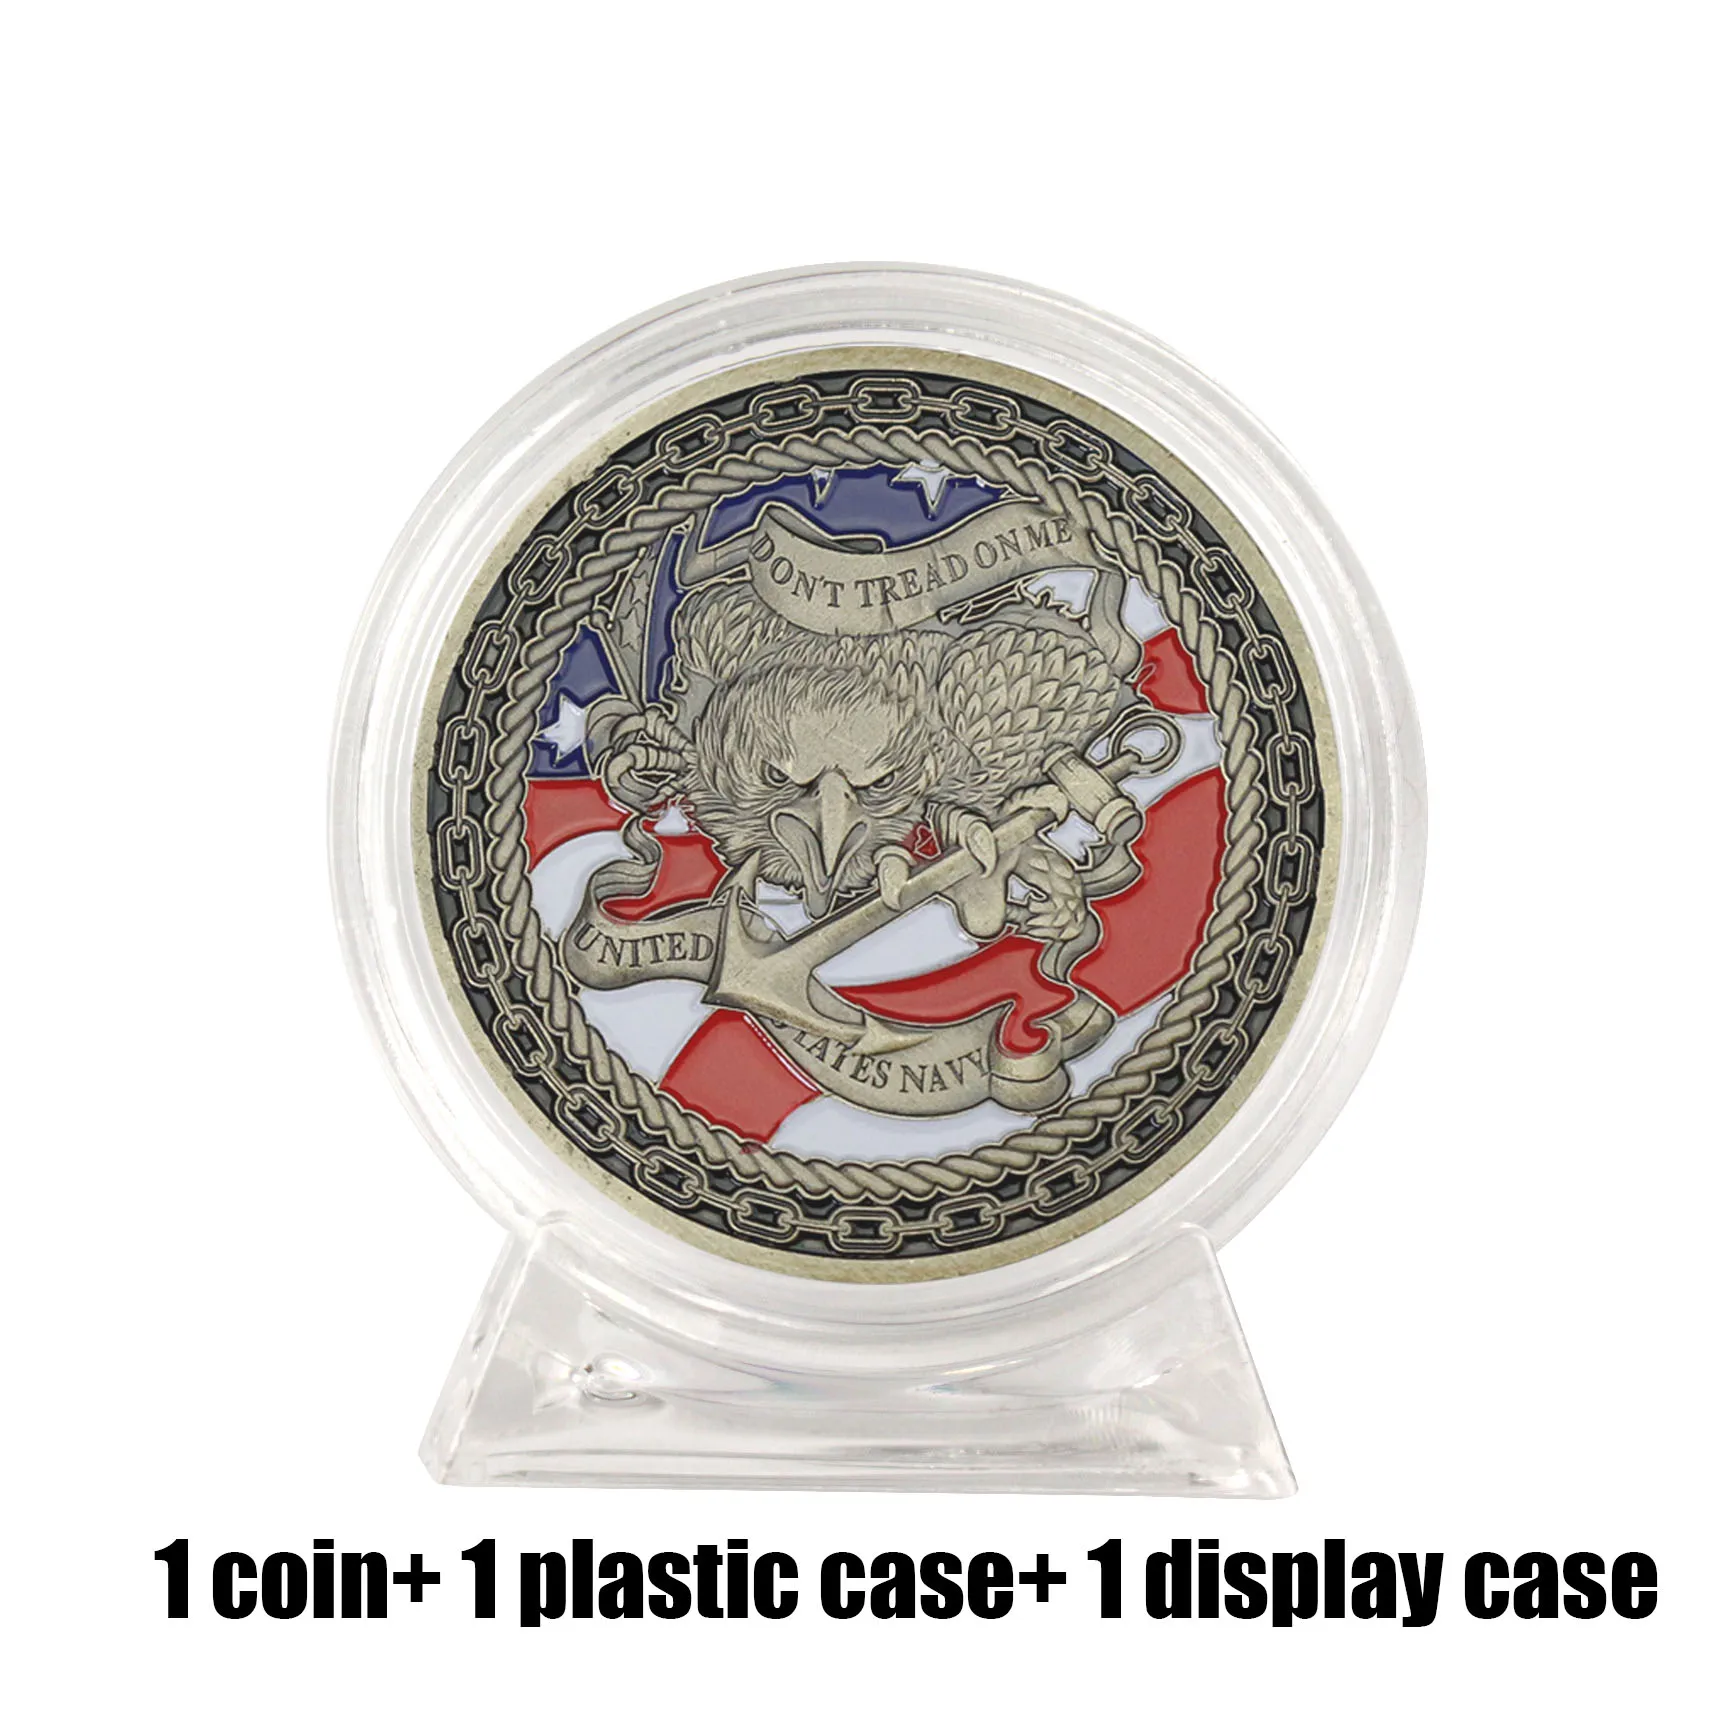 Navy Chiefs Souvenirs Don’t Step on Me Collectibles Honor Coins Collection Copper-Plated Commemorative Coins Collection Commemorative Coins-Best Gift U.S